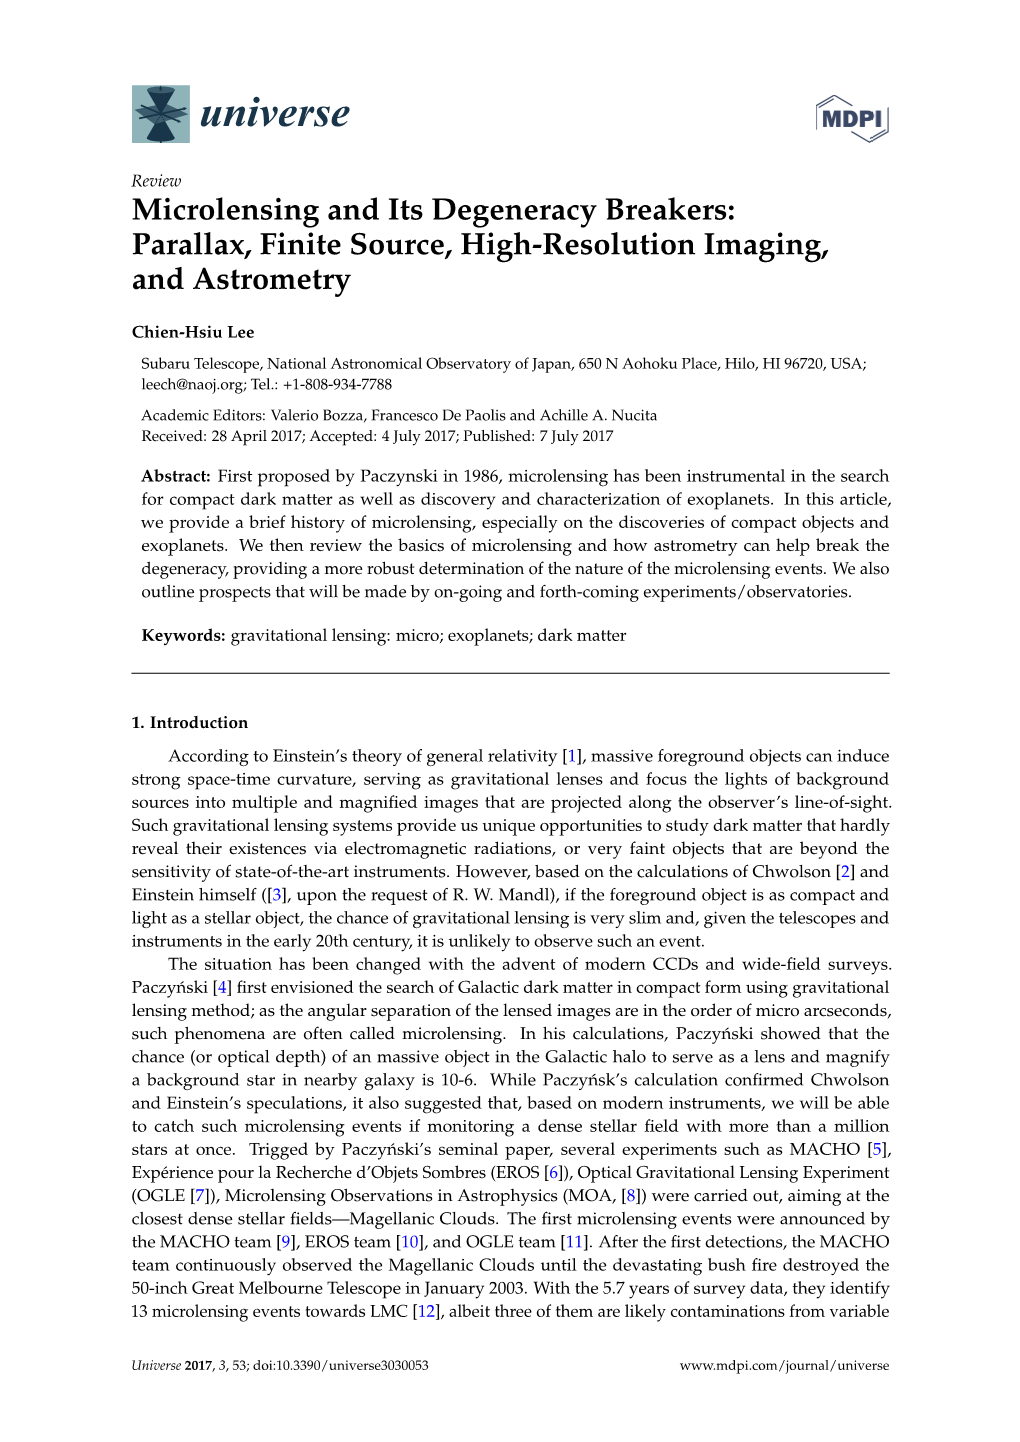 Microlensing and Its Degeneracy Breakers: Parallax, Finite Source, High-Resolution Imaging, and Astrometry